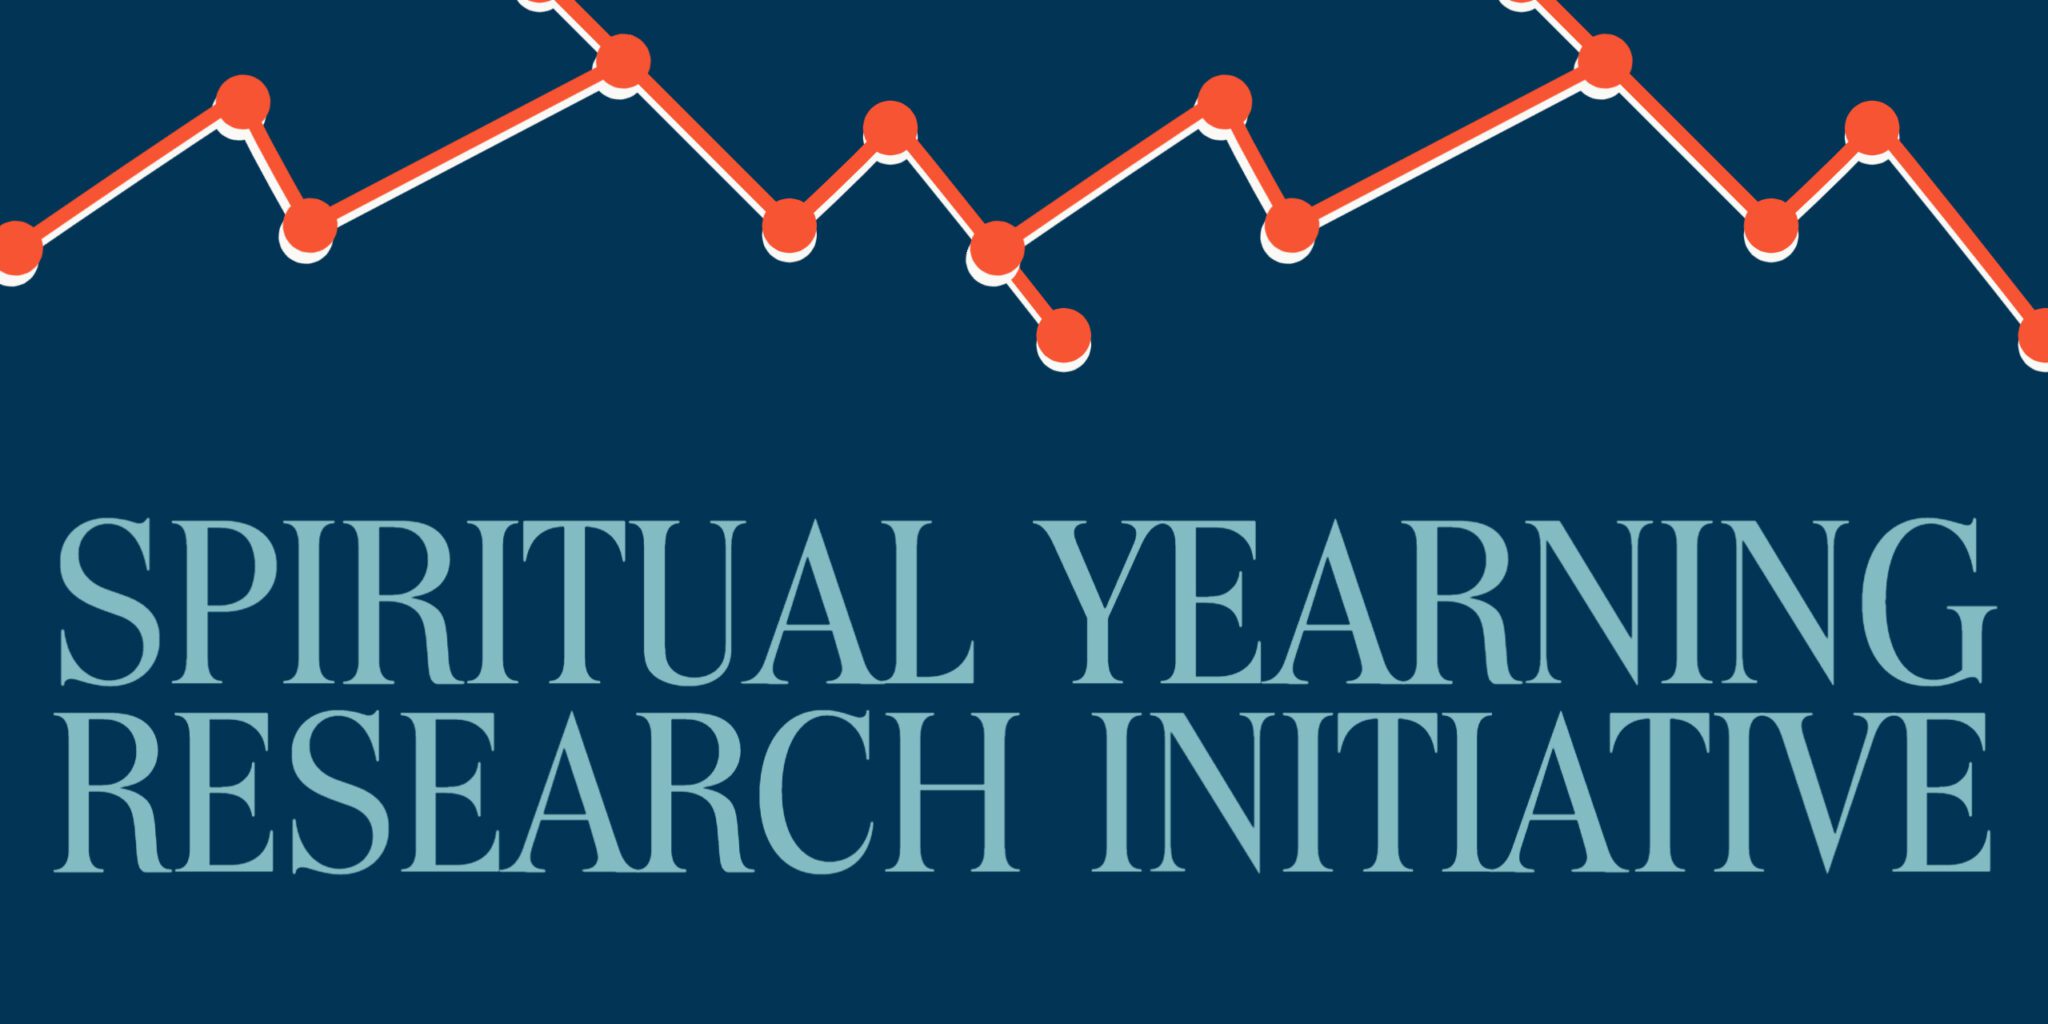 The Spiritual Yearning Research Initiative seeks to address the spiritual yearnings of the spiritually curious but nonreligious.